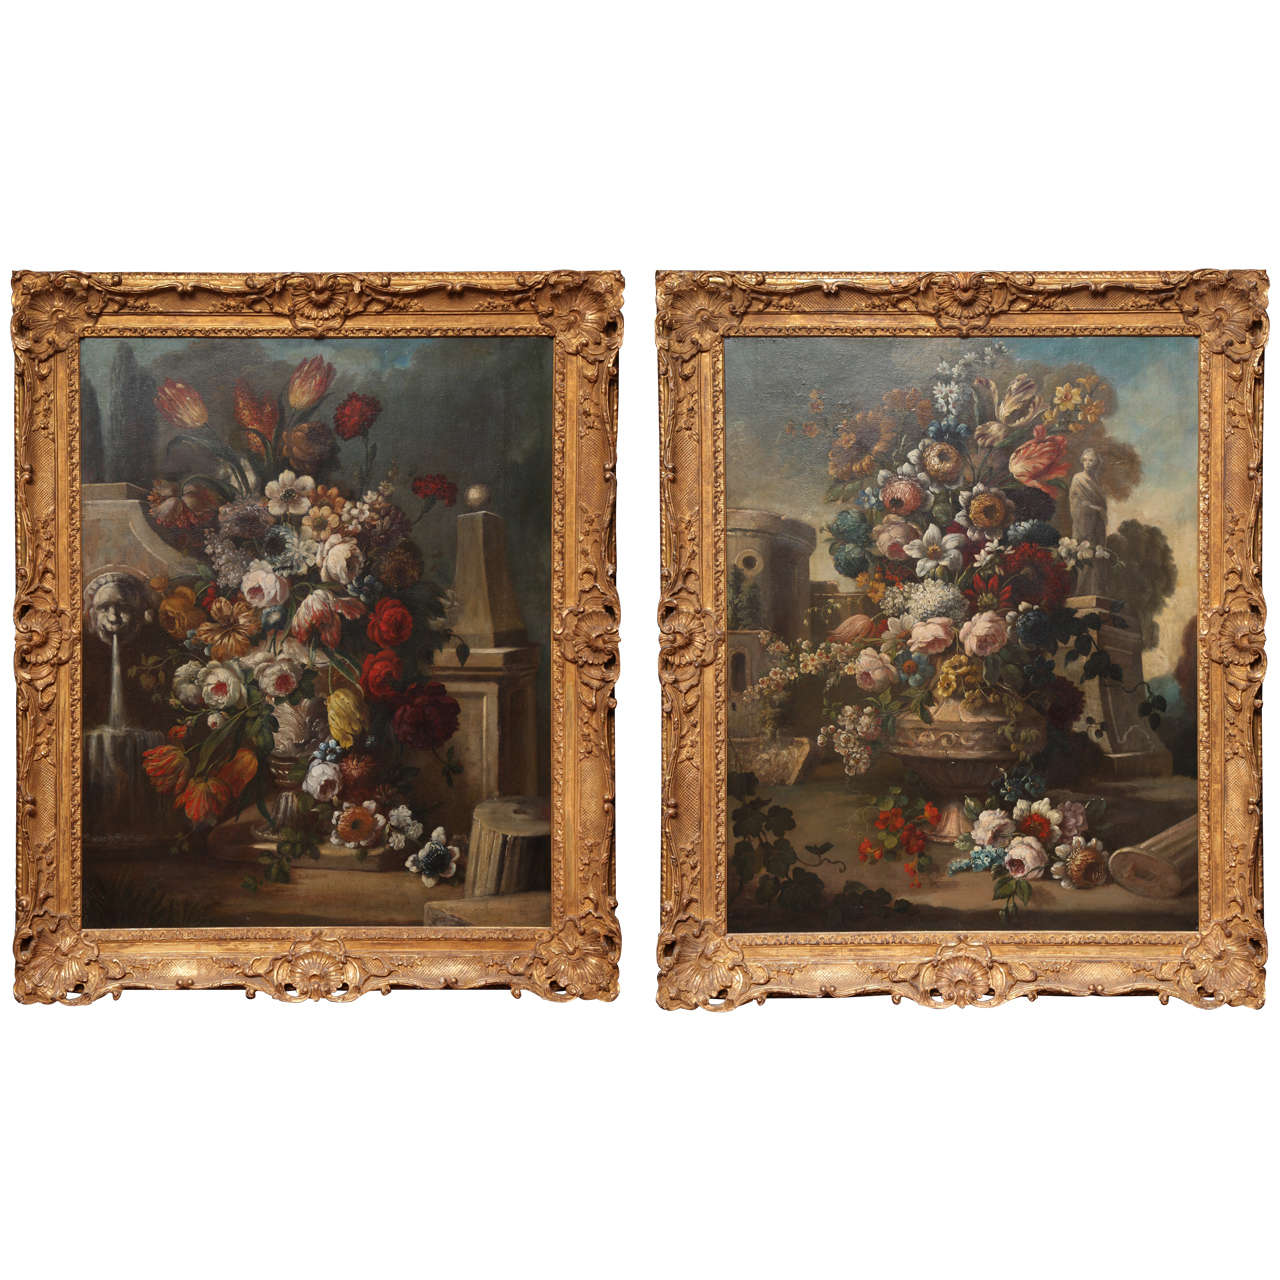 Pair of Still Life Paintings of Flowers, French, 18th Century, Original Frames